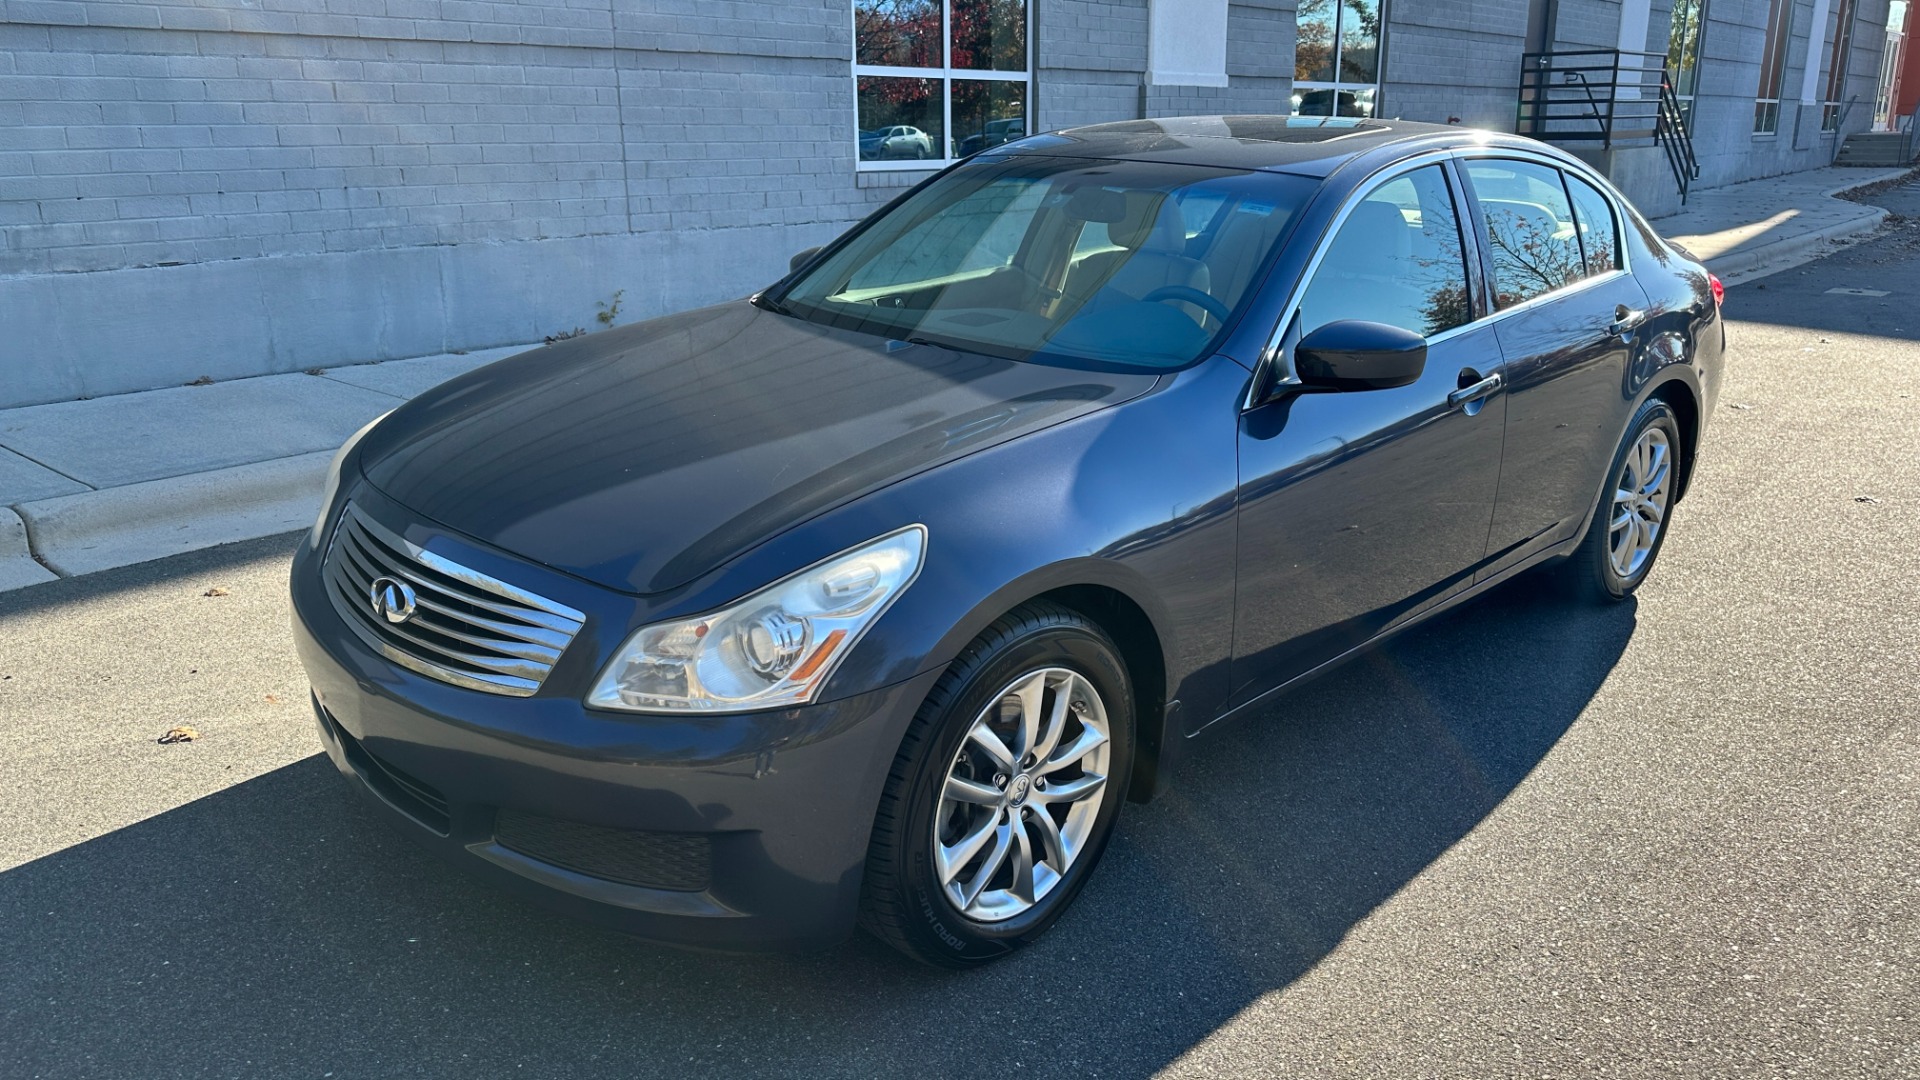 Used 2009 INFINITI G37 Sedan X / AWD / PREMIUM PACKAGE / BOSE / LEATHER / 3.7L V6 / WOOD TRIM for sale $6,798 at Formula Imports in Charlotte NC 28227 2